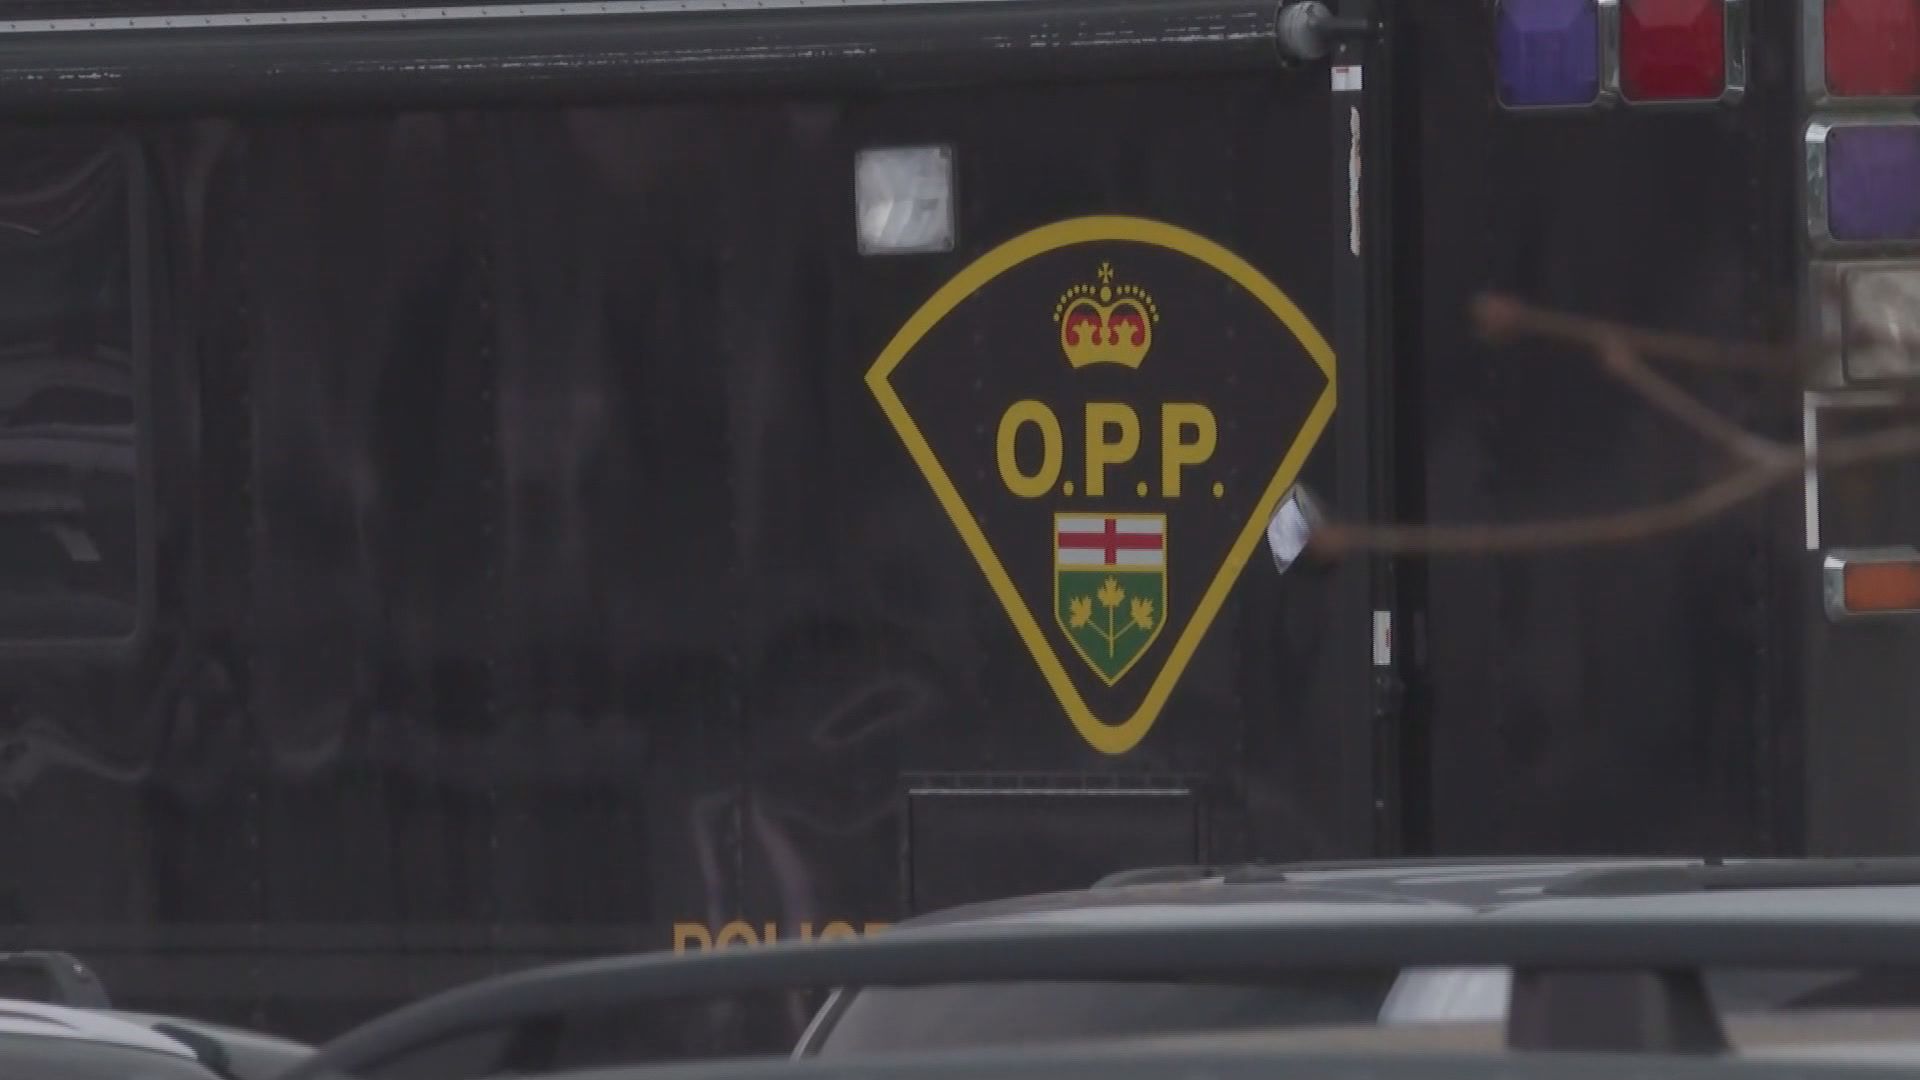 Auto theft: Ontario and Montreal police reportedly working on joint investigation